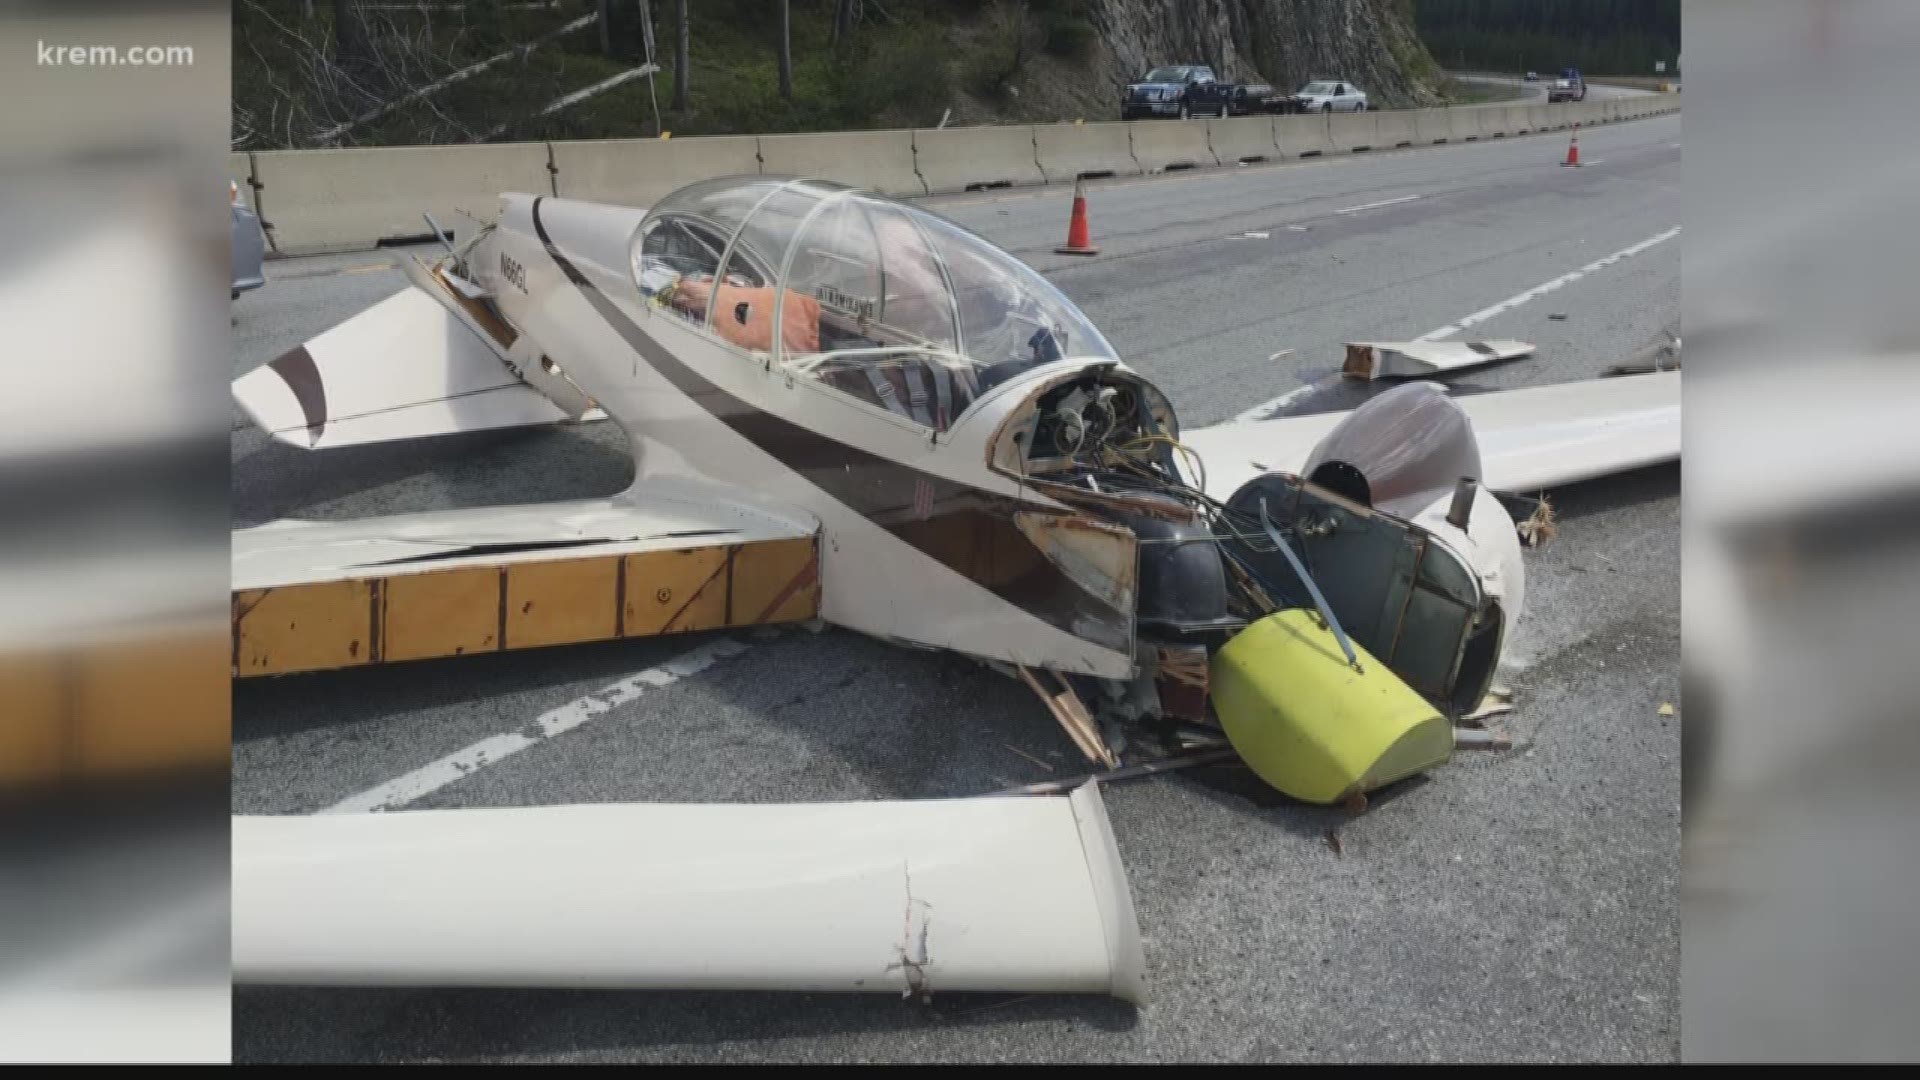 A witness says he watched the plane go down onto the interstate and the pilot was able to walk away from the crash. (5-22-18)